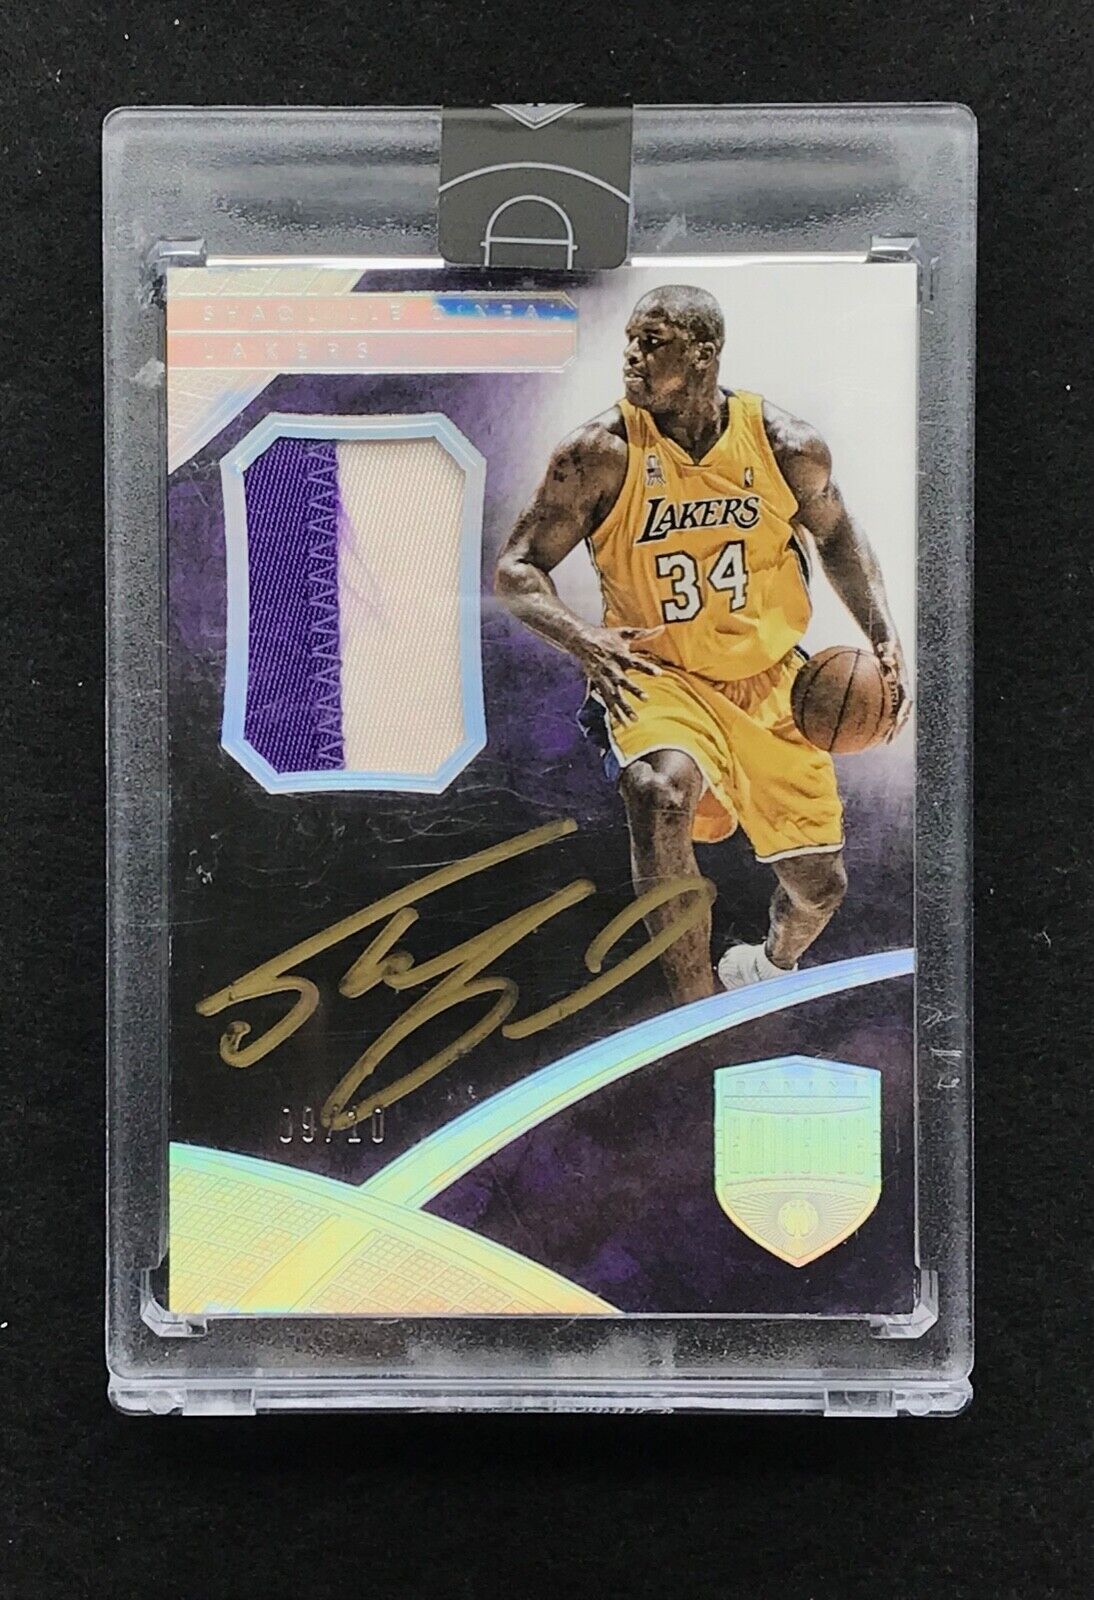 2014-15 PANINI EMINENCE SHAQUILLE O\'NEIL AUTOGRAPH GAME USED JERSEY CARD #9/10